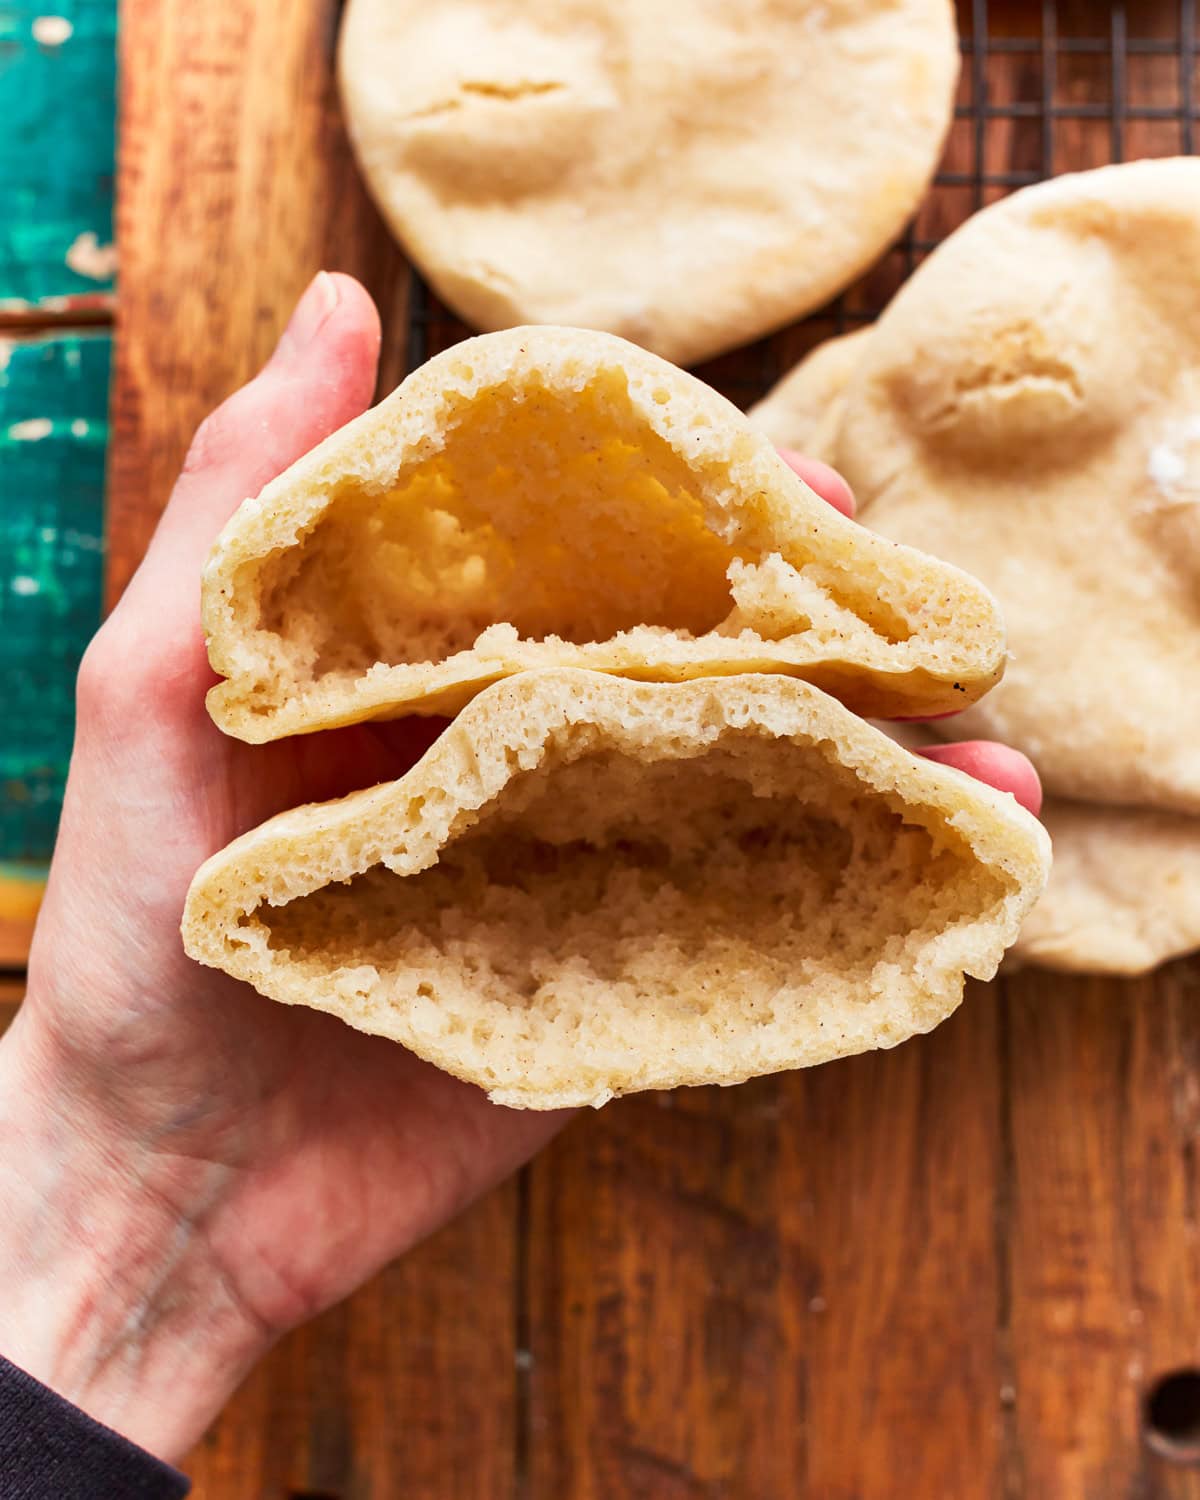 holding a halved gluten-free pita to show the pocket.